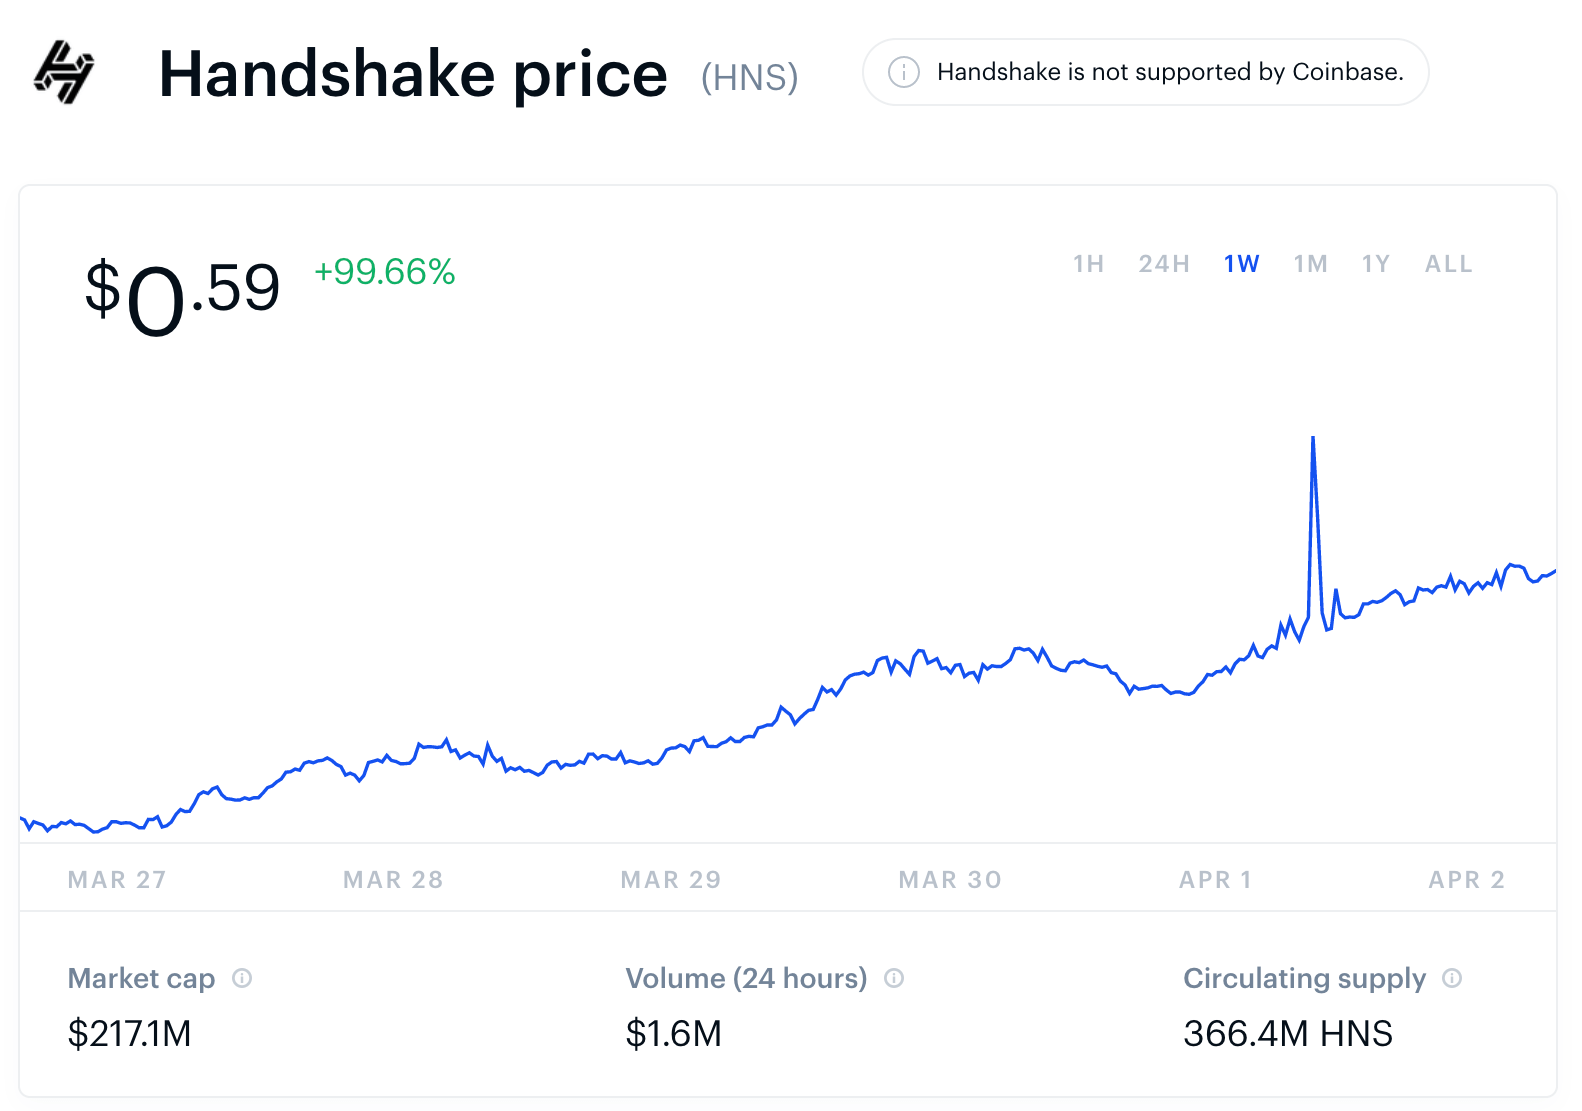 My thinking about investment opportunities in the Handshake domain space is changing